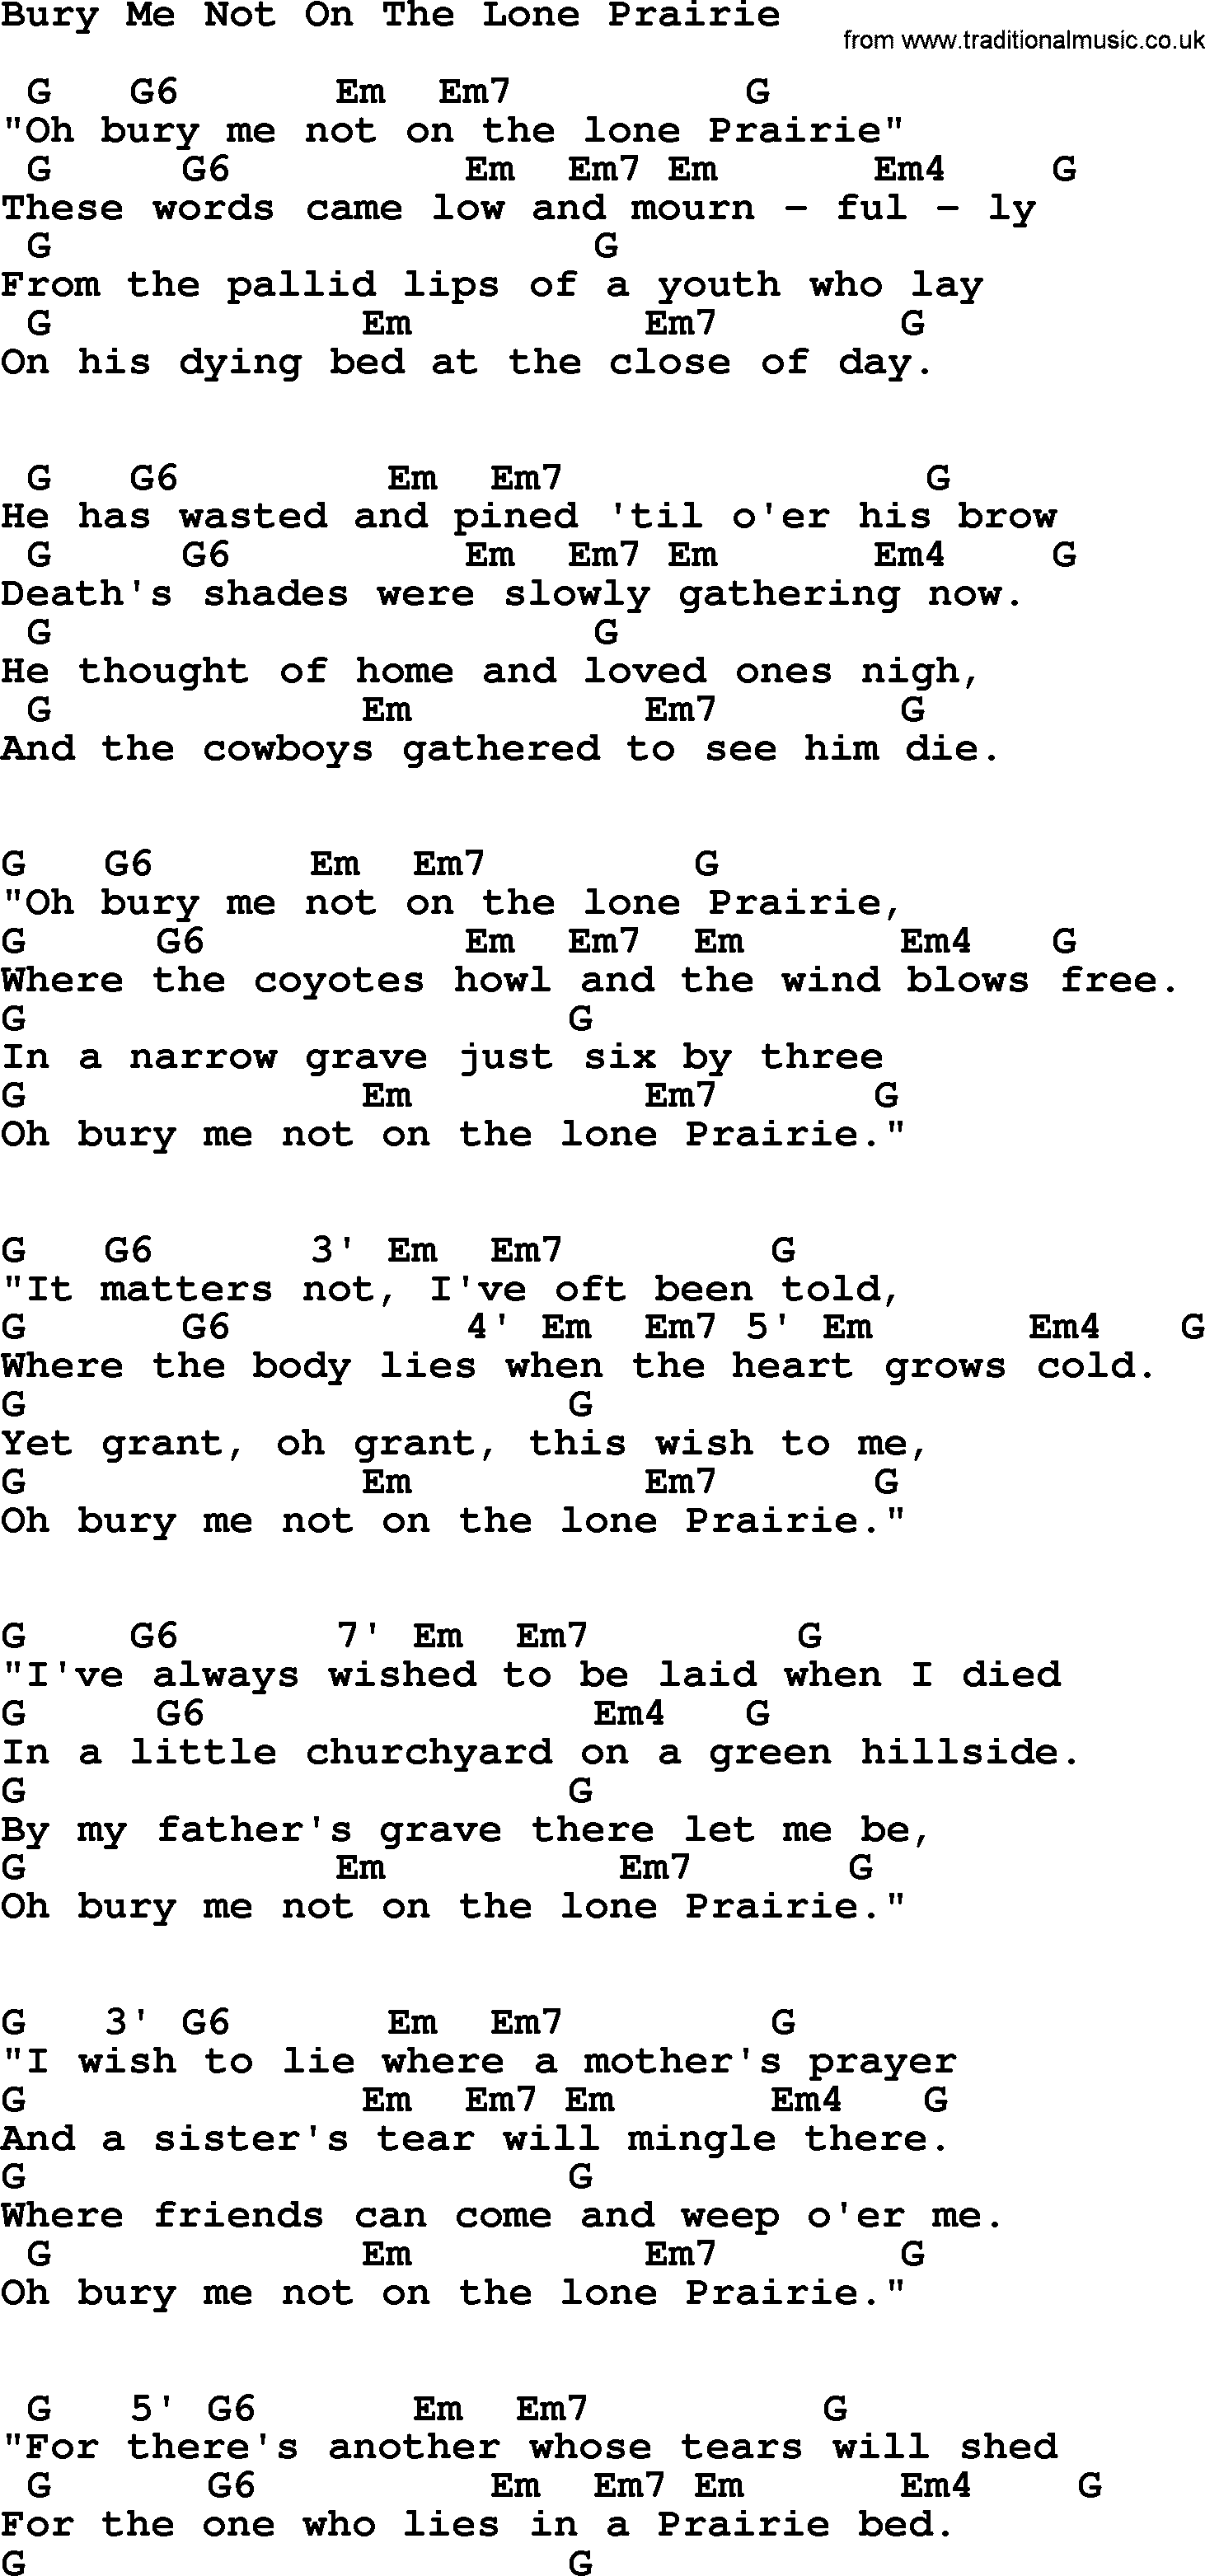 Johnny Cash song Bury Me Not On The Lone Prairie, lyrics and chords